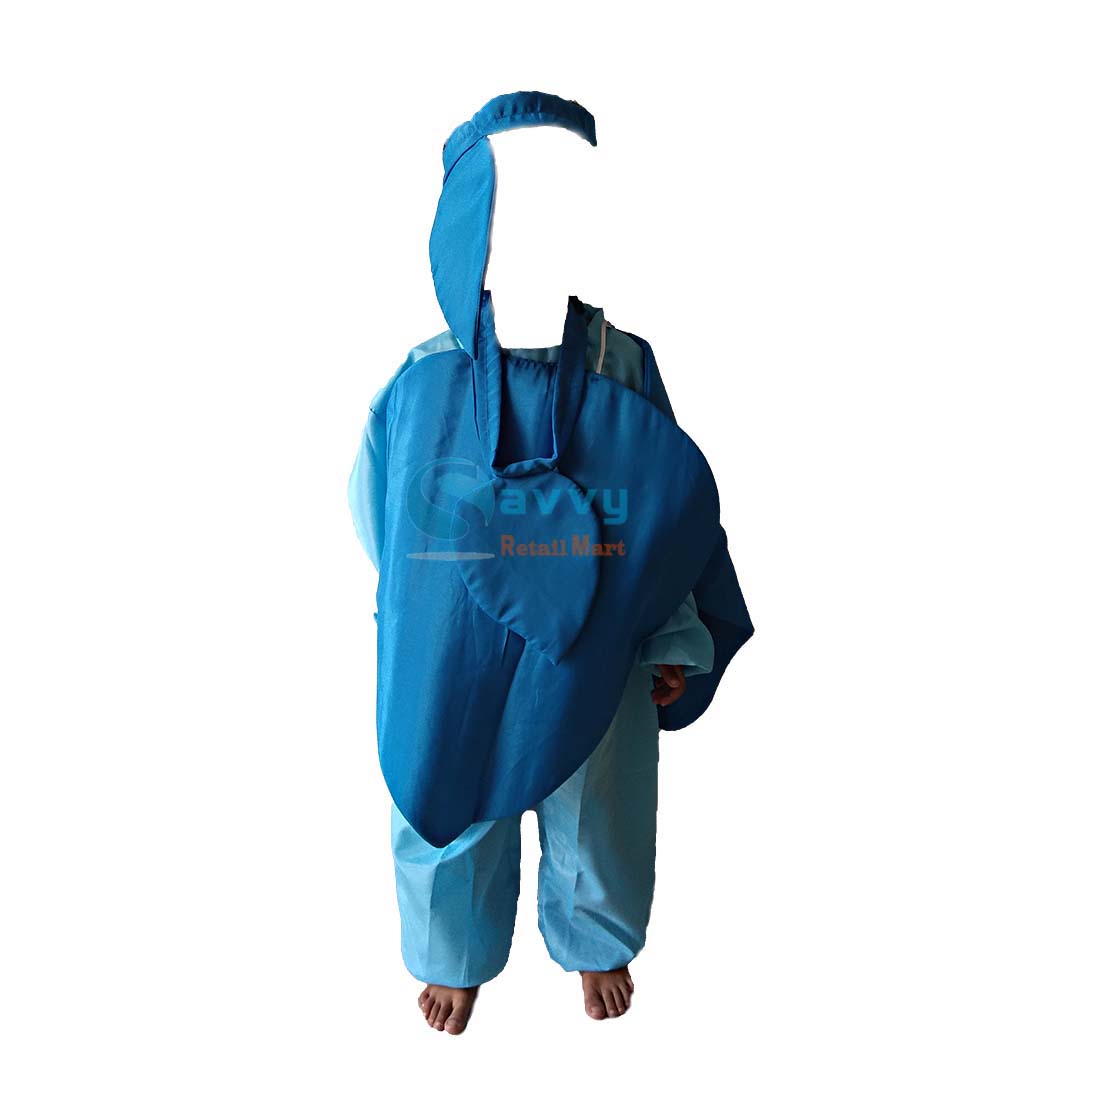 Colorful Raindrop Drip Water Drop Mascot Costume For Adults Perfect For  Halloween And Carnival Parties From Superhotclothes, $170.56 | DHgate.Com